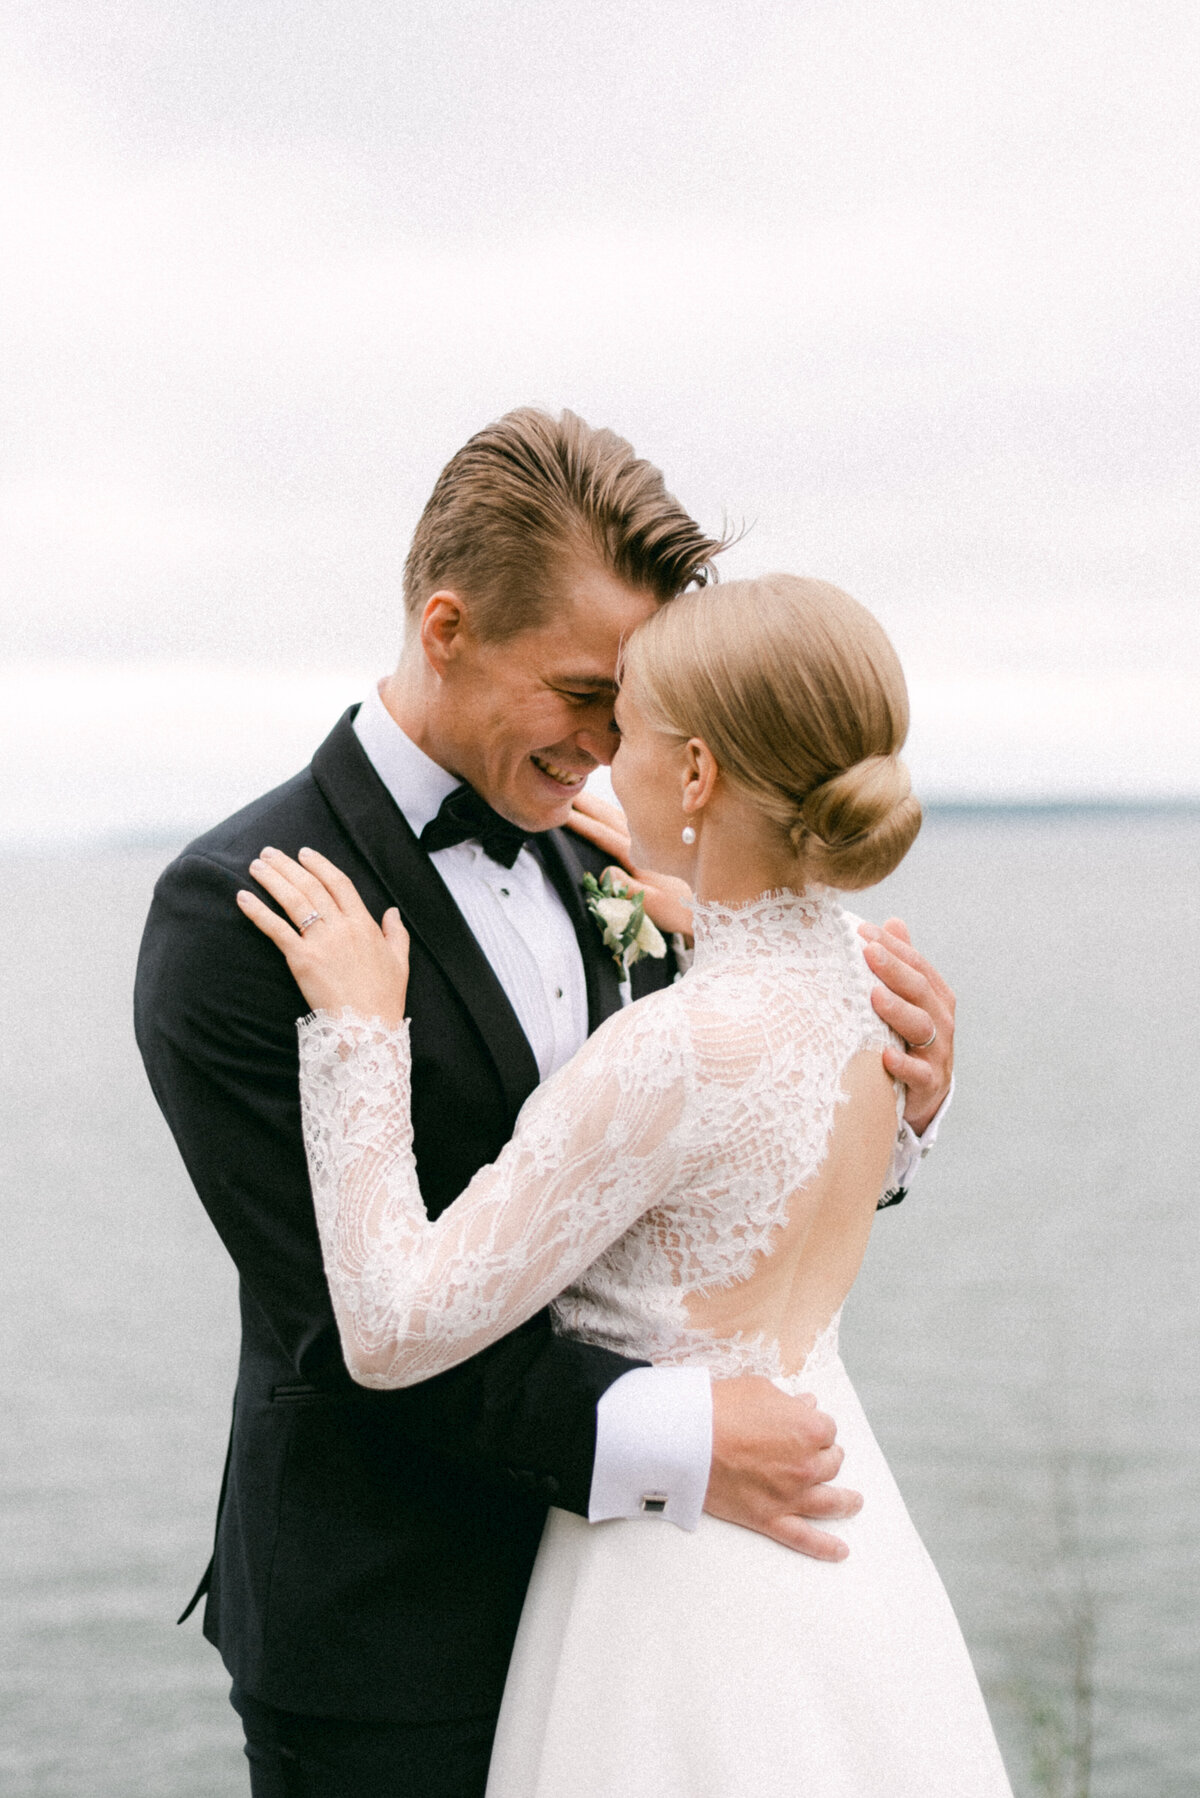 A wedding couple photographed by the sea in Finland by wedding photographer Hannika Gabrielsson.